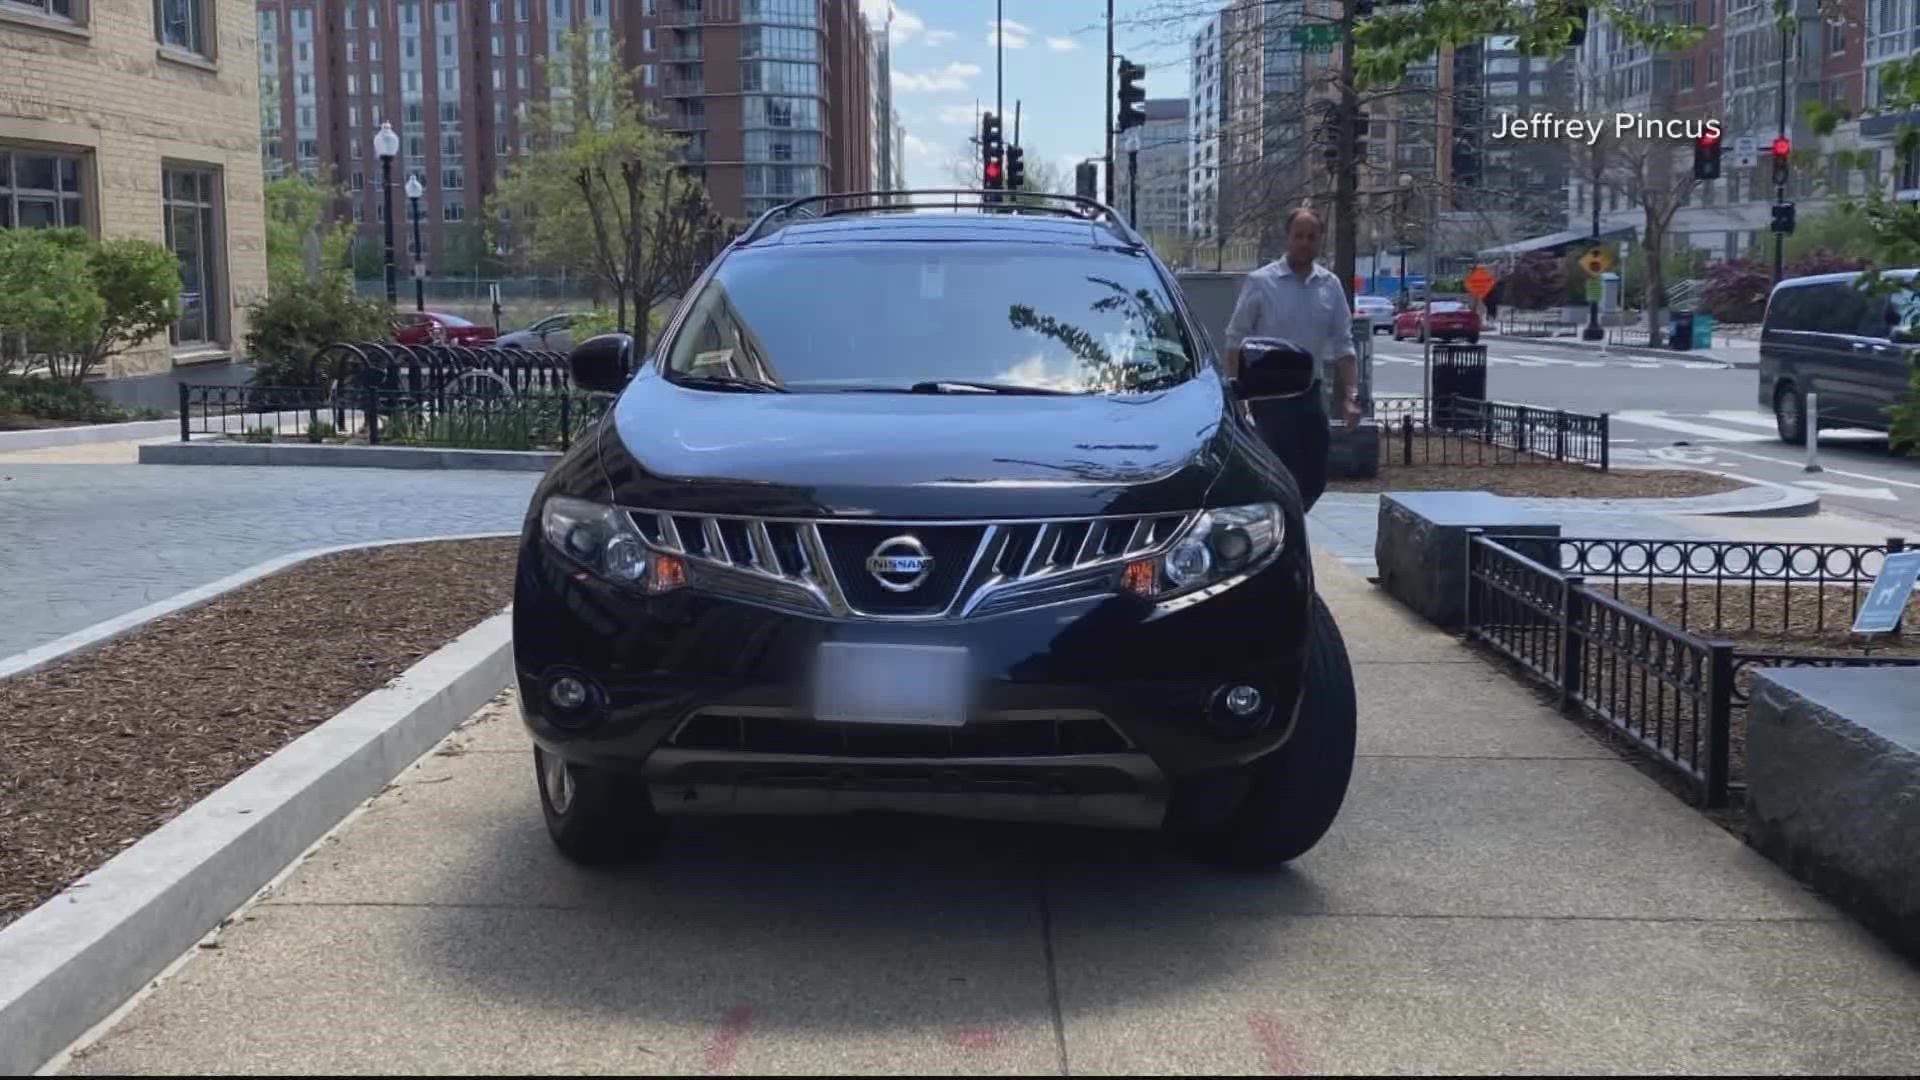 A Navy Yard resident spotted this car, which has 50 separate tickets, parked on the DC sidewalk Sunday.